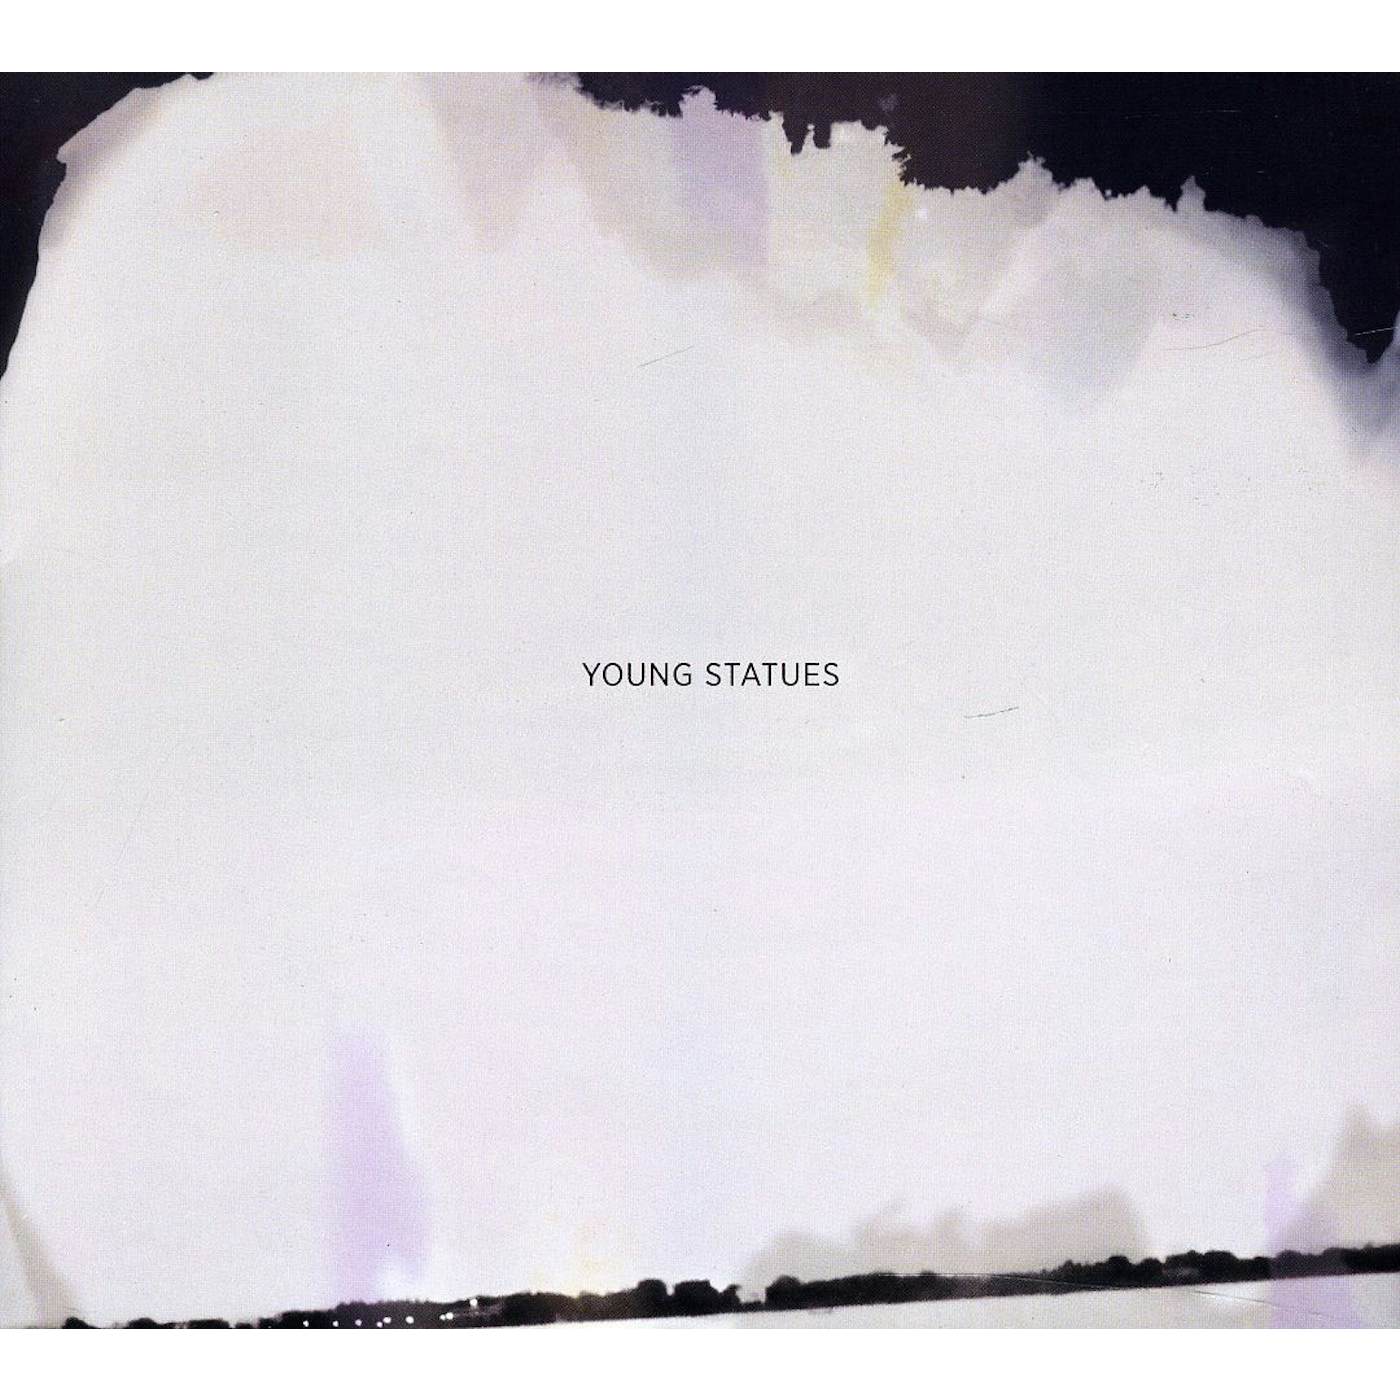 YOUNG STATUES CD